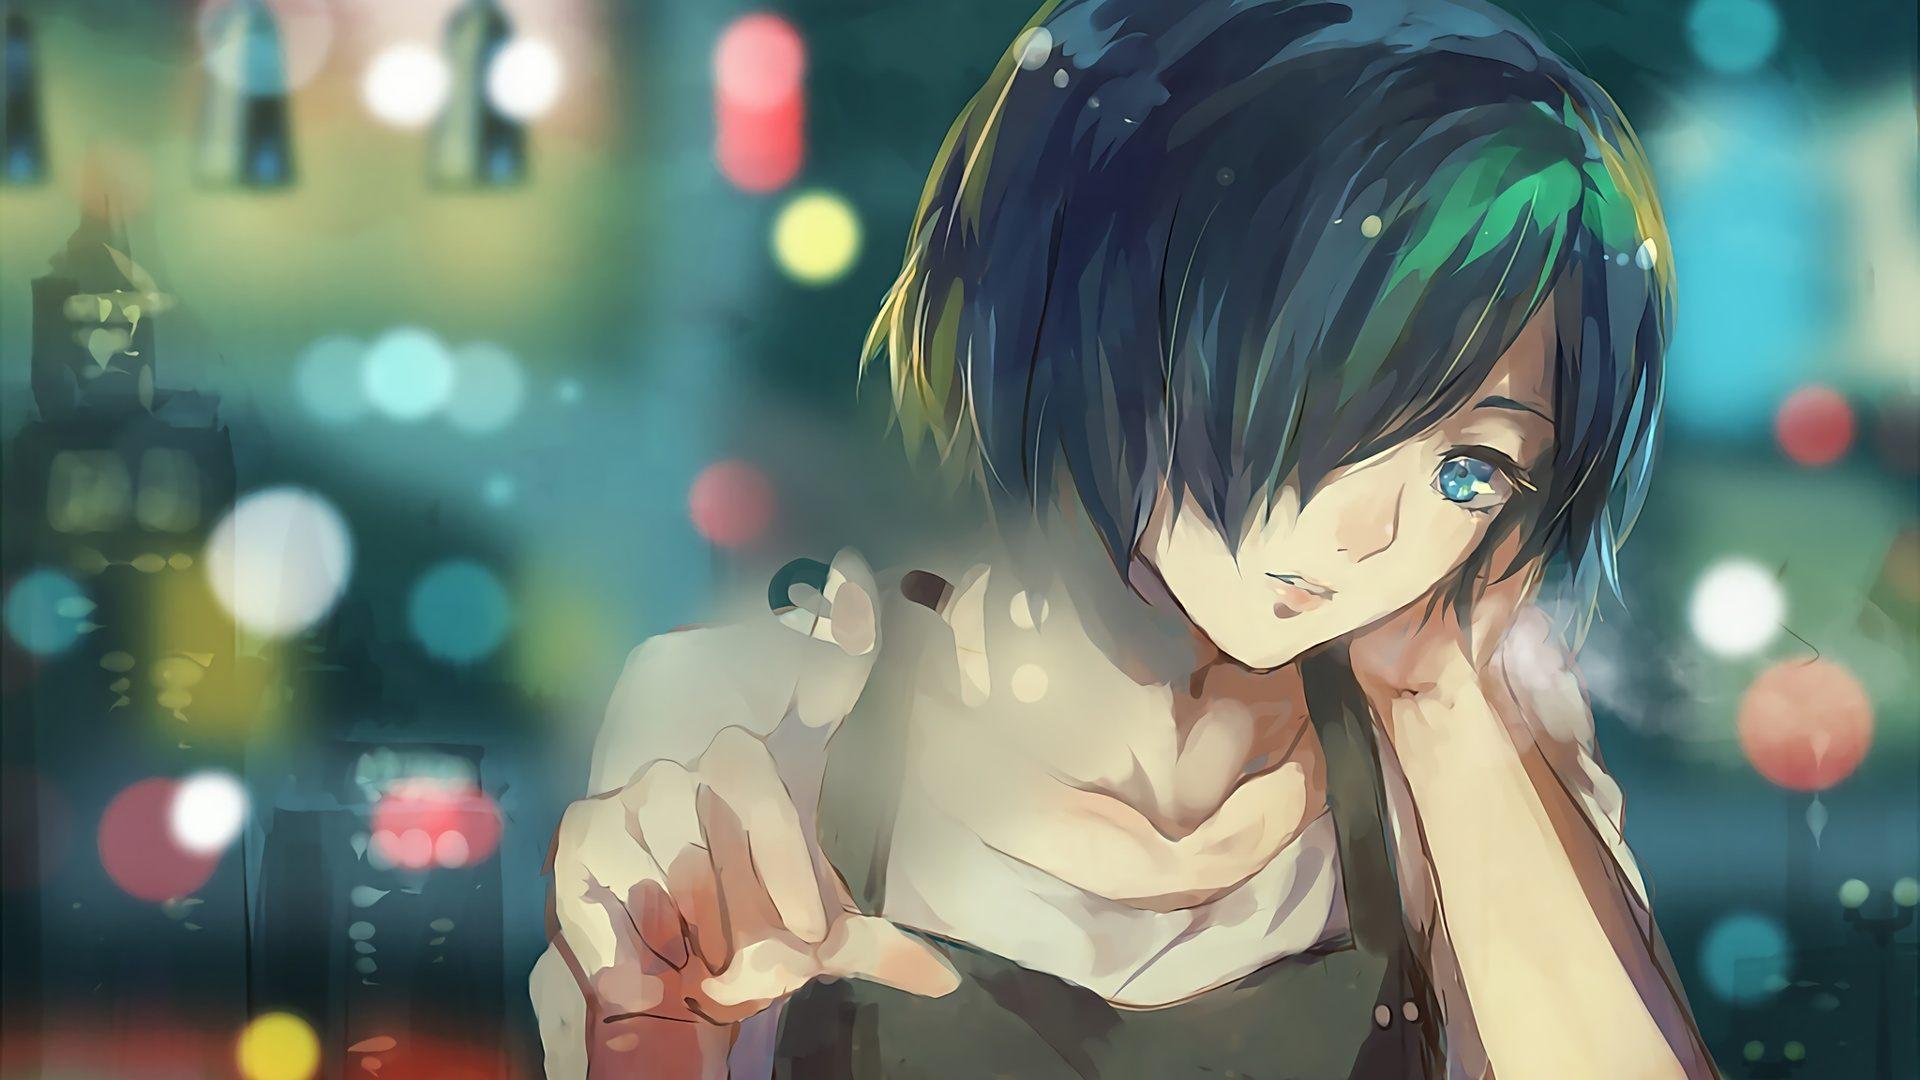 Anime Wallpaper Hd For Android Apk Download